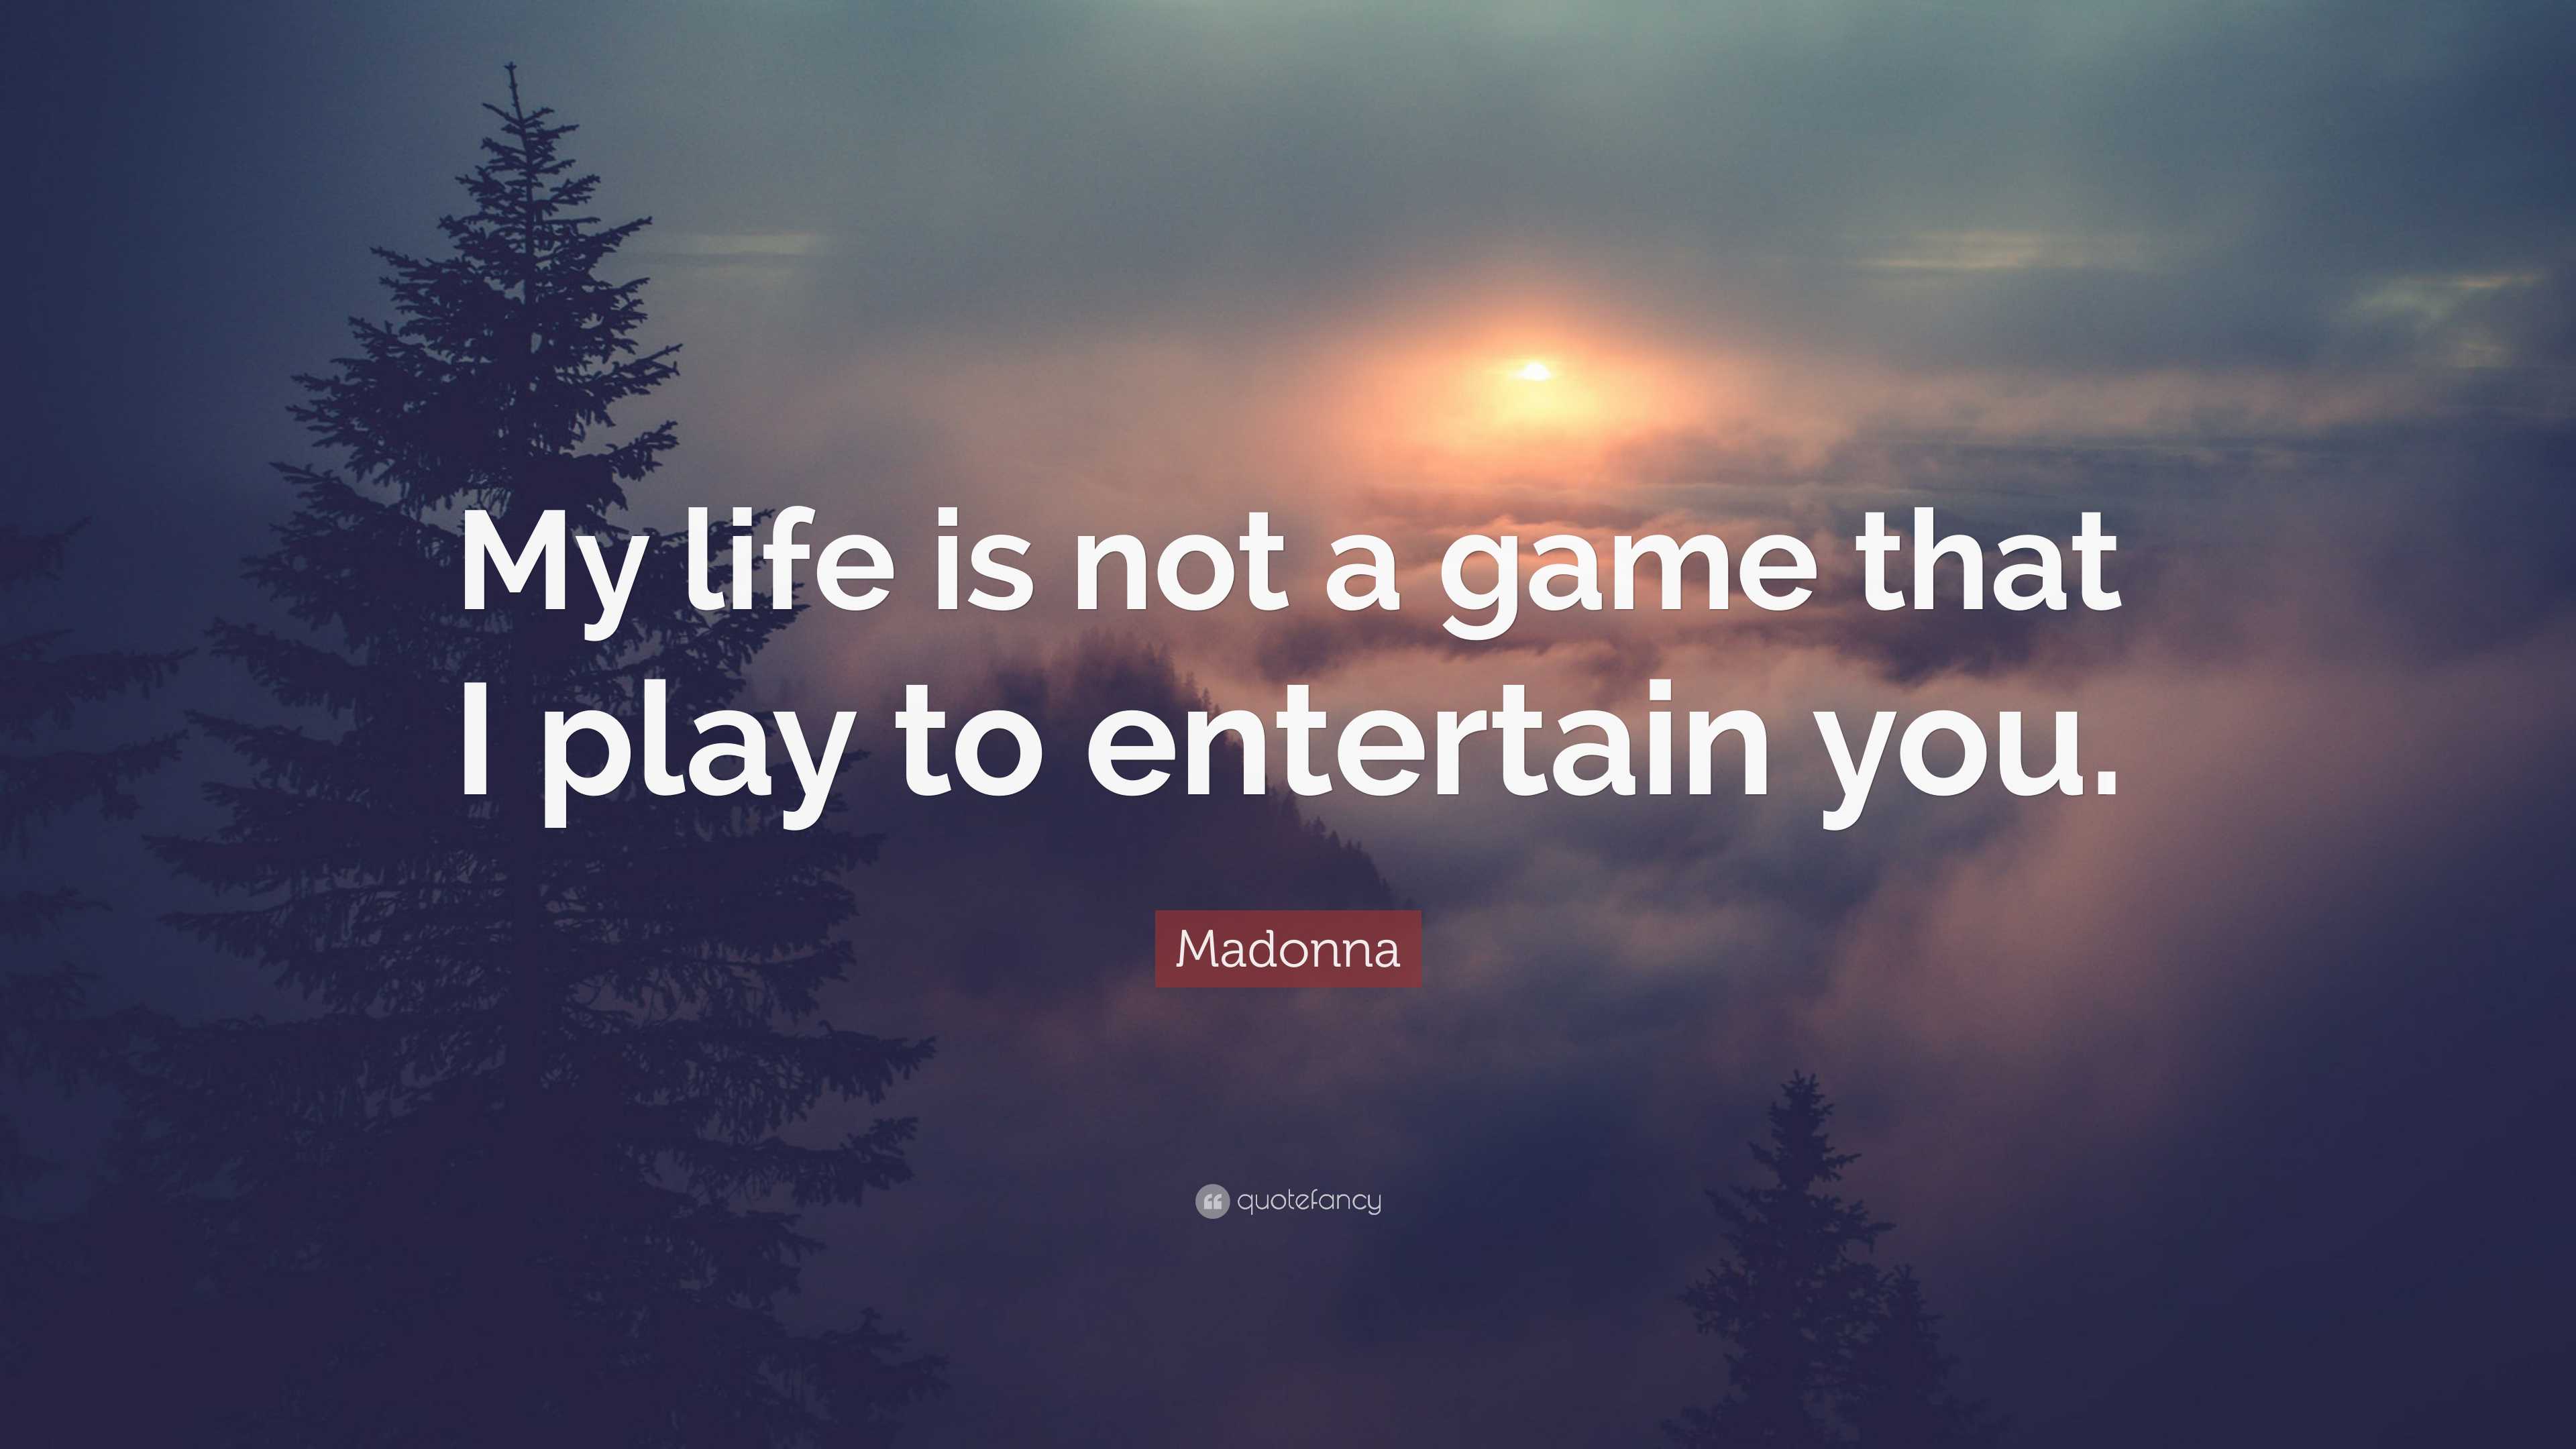 Madonna Quote: “My life is not a game that I play to entertain you.”